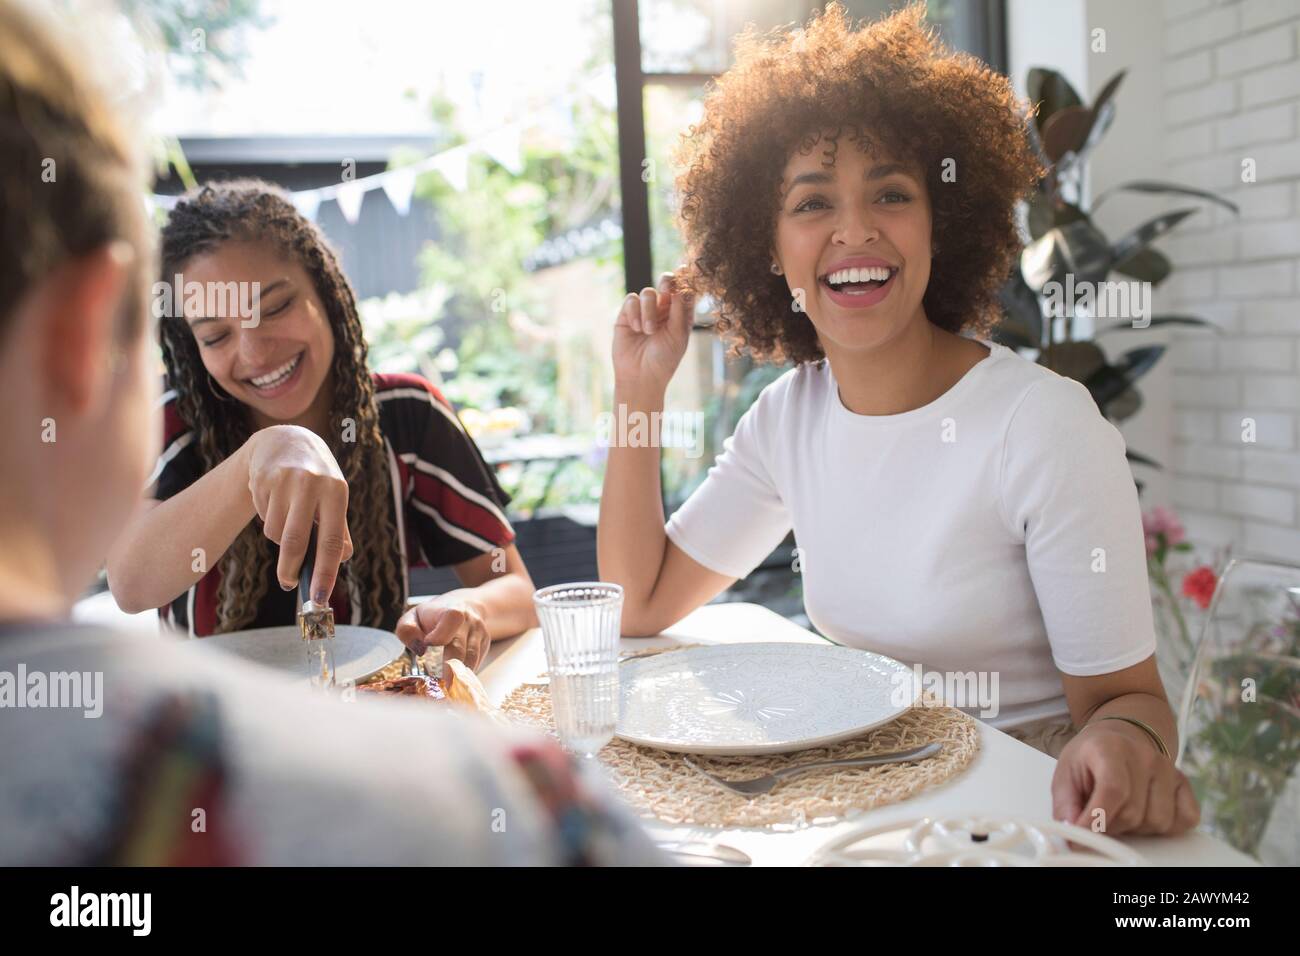 Happy young women friends enjoying lunch at dining table Stock Photo